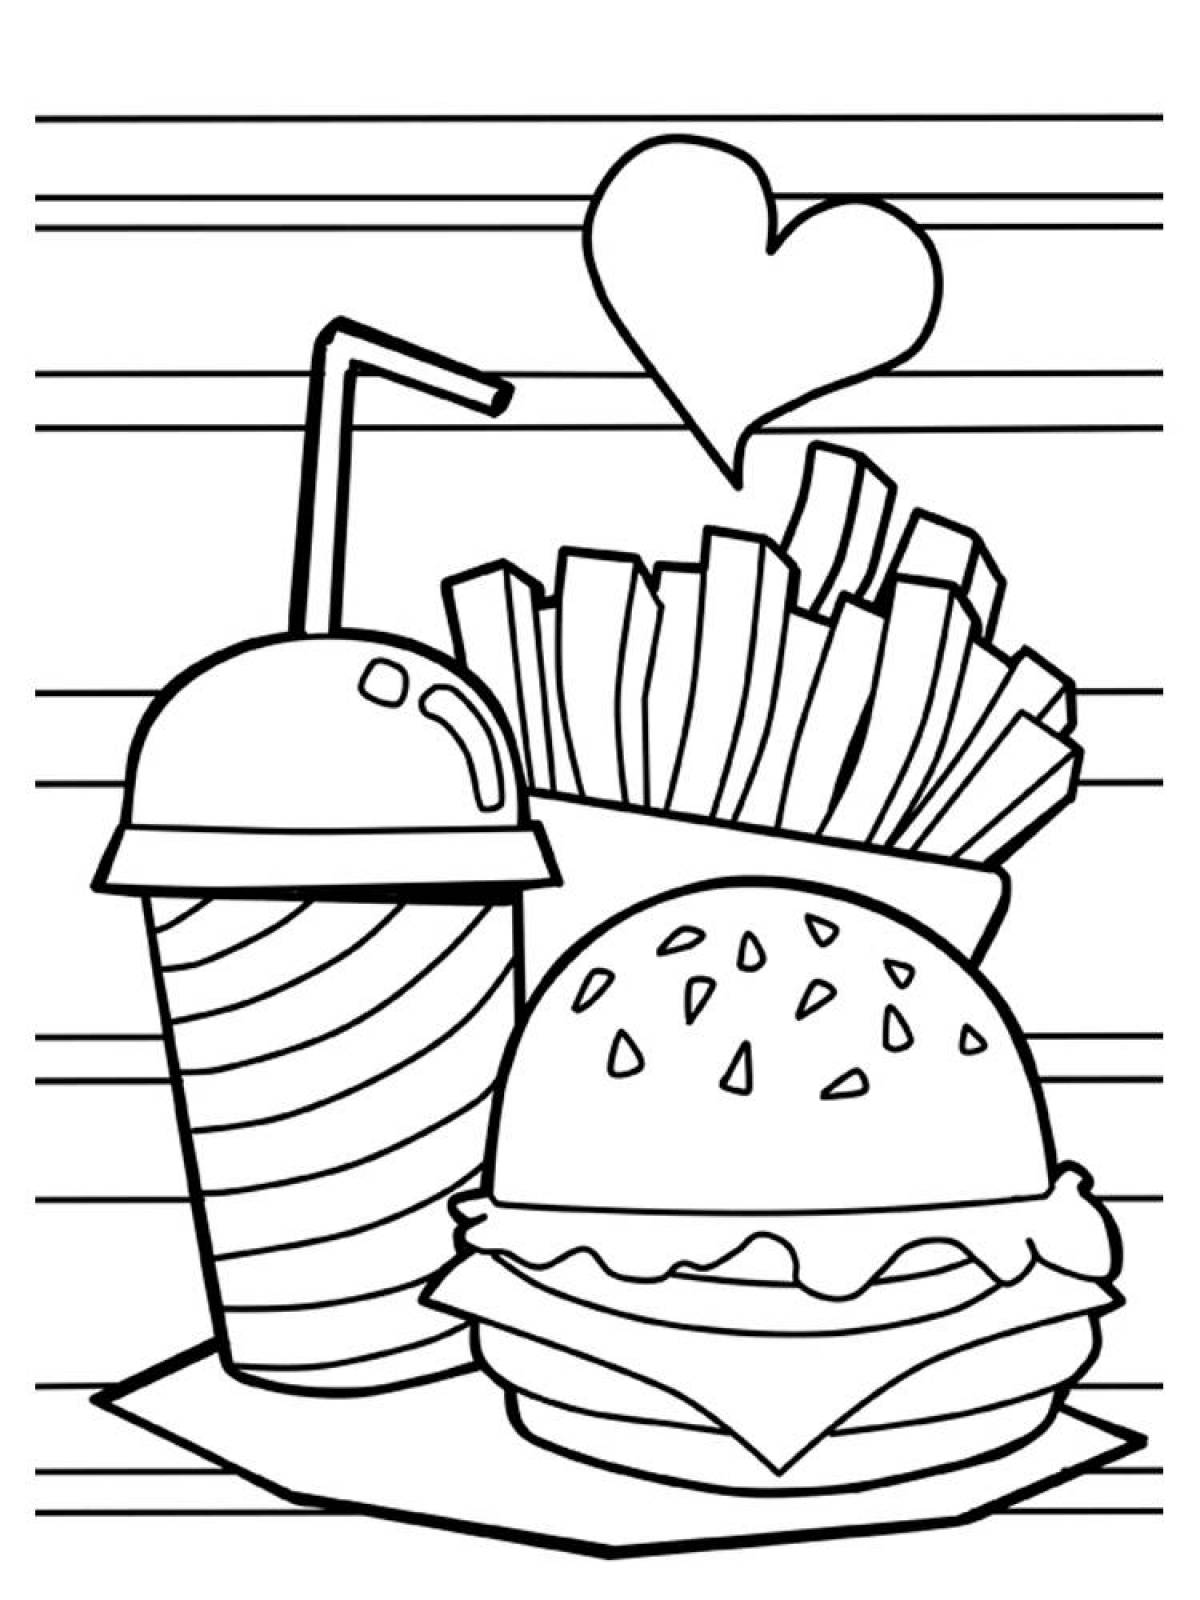 Tempting Burger Coloring Page